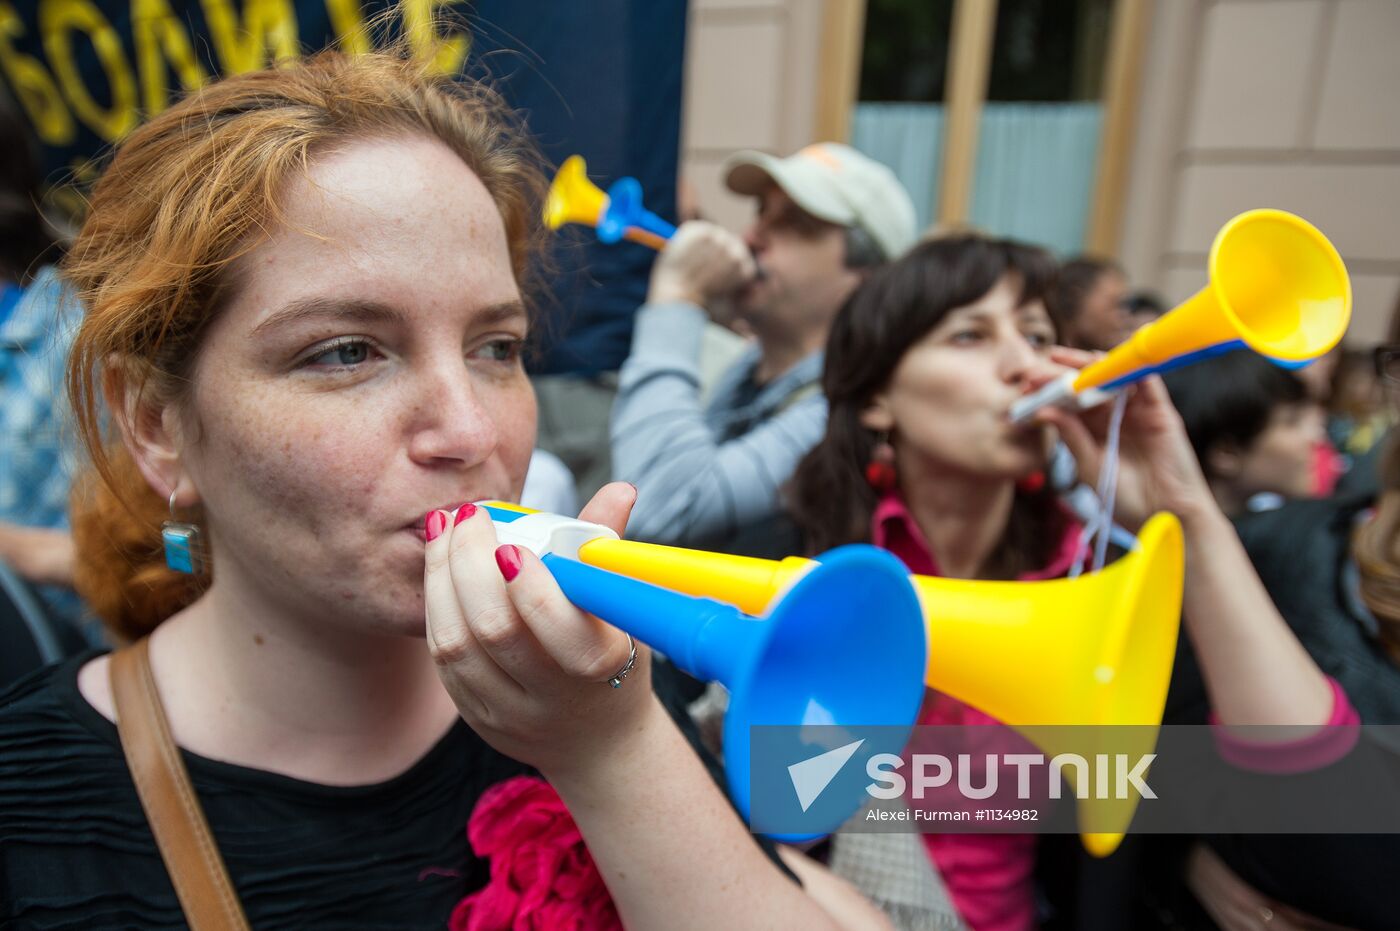 Save Your Language rally in Kiev